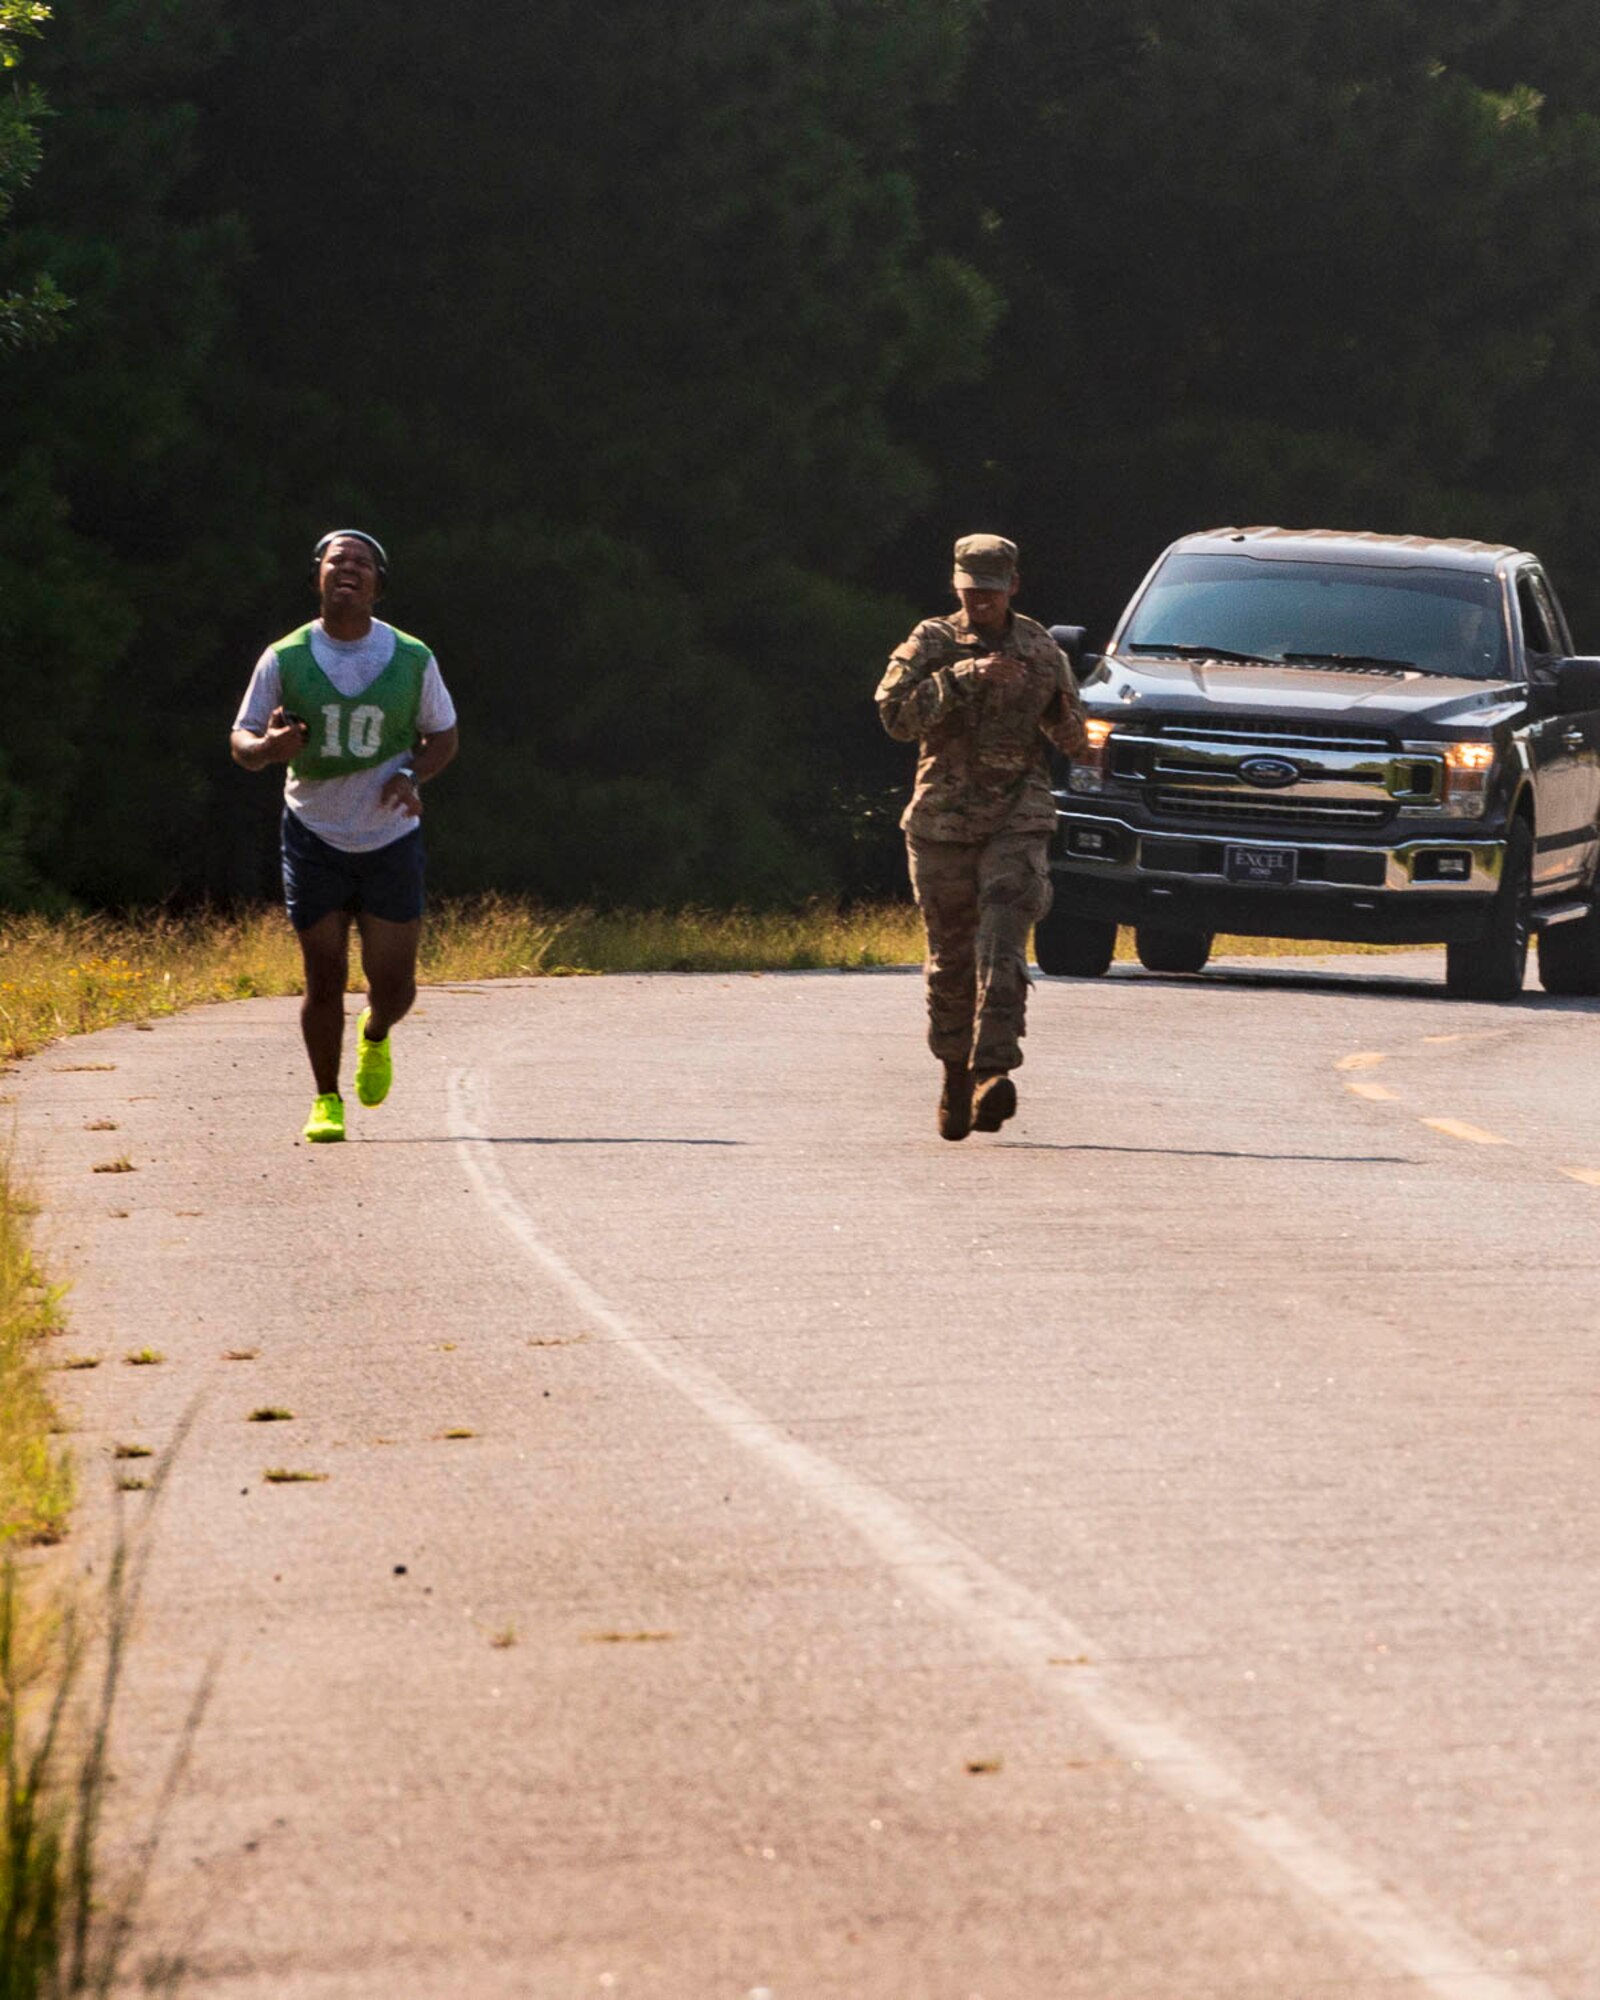 An Airman assigned to the 96th Aerial Port Squadron and a supportive wingman finishes the run portion of an official physical fitness test Sunday, Sept. 8, 2019, at Little Rock Air Force Base, Ark. Over the drill weekend, the unit fitness program manager and physical training leaders evaluated more than 100 Airmen to ensure annual readiness requirements were upheld. The Air Force Reserve’s overall readiness depends on the individual readiness of each Reserve Citizen Airman. (U.S. Air Force Reserve photo by Maj. Ashley Walker)